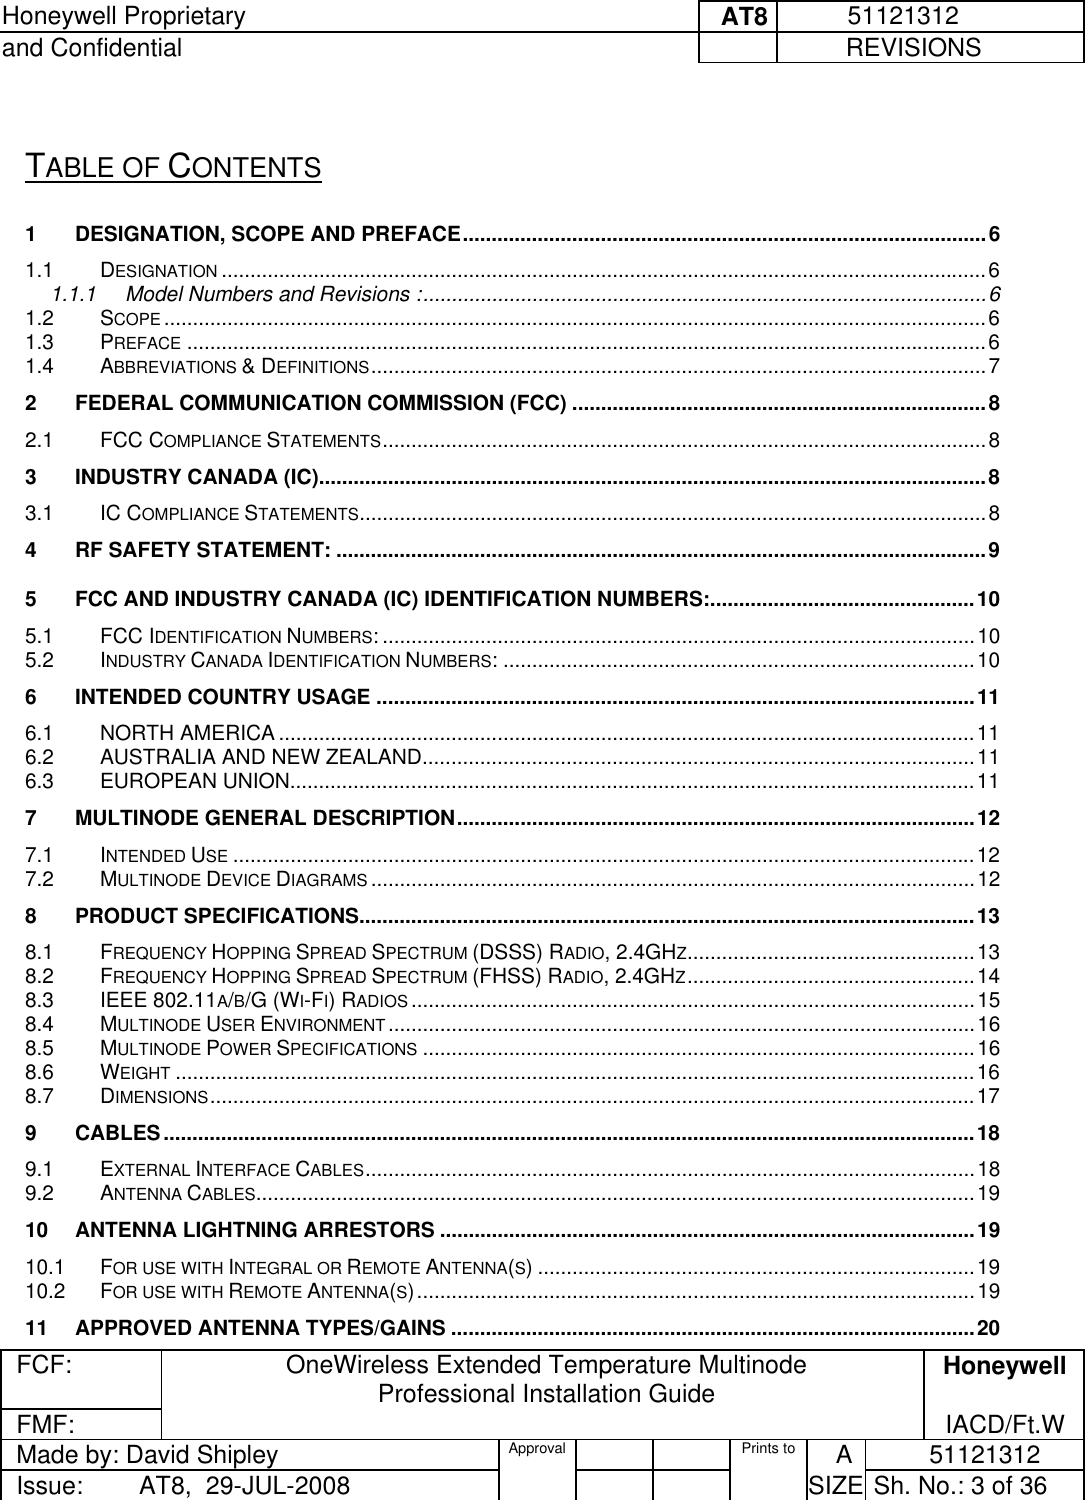 Honeywell Proprietary     AT8           51121312 and Confidential             REVISIONS  FCF: OneWireless Extended Temperature Multinode  Professional Installation Guide  Honeywell FMF:               IACD/Ft.W Made by: David Shipley  Approval   Prints to     A           51121312 Issue:        AT8,  29-JUL-2008          SIZE  Sh. No.: 3 of 36   TABLE OF CONTENTS 1 DESIGNATION, SCOPE AND PREFACE...........................................................................................6 1.1 DESIGNATION .....................................................................................................................................6 1.1.1 Model Numbers and Revisions :..................................................................................................6 1.2 SCOPE ...............................................................................................................................................6 1.3 PREFACE ...........................................................................................................................................6 1.4 ABBREVIATIONS &amp; DEFINITIONS...........................................................................................................7 2 FEDERAL COMMUNICATION COMMISSION (FCC) ........................................................................8 2.1 FCC COMPLIANCE STATEMENTS.........................................................................................................8 3 INDUSTRY CANADA (IC)....................................................................................................................8 3.1 IC COMPLIANCE STATEMENTS.............................................................................................................8 4 RF SAFETY STATEMENT: .................................................................................................................9 5 FCC AND INDUSTRY CANADA (IC) IDENTIFICATION NUMBERS:..............................................10 5.1 FCC IDENTIFICATION NUMBERS: .......................................................................................................10 5.2 INDUSTRY CANADA IDENTIFICATION NUMBERS: ..................................................................................10 6 INTENDED COUNTRY USAGE ........................................................................................................11 6.1 NORTH AMERICA .........................................................................................................................11 6.2 AUSTRALIA AND NEW ZEALAND................................................................................................11 6.3 EUROPEAN UNION.......................................................................................................................11 7 MULTINODE GENERAL DESCRIPTION..........................................................................................12 7.1 INTENDED USE .................................................................................................................................12 7.2 MULTINODE DEVICE DIAGRAMS .........................................................................................................12 8 PRODUCT SPECIFICATIONS...........................................................................................................13 8.1 FREQUENCY HOPPING SPREAD SPECTRUM (DSSS) RADIO, 2.4GHZ..................................................13 8.2 FREQUENCY HOPPING SPREAD SPECTRUM (FHSS) RADIO, 2.4GHZ..................................................14 8.3 IEEE 802.11A/B/G (WI-FI) RADIOS ..................................................................................................15 8.4 MULTINODE USER ENVIRONMENT......................................................................................................16 8.5 MULTINODE POWER SPECIFICATIONS ................................................................................................16 8.6 WEIGHT ...........................................................................................................................................16 8.7 DIMENSIONS.....................................................................................................................................17 9 CABLES.............................................................................................................................................18 9.1 EXTERNAL INTERFACE CABLES..........................................................................................................18 9.2 ANTENNA CABLES.............................................................................................................................19 10 ANTENNA LIGHTNING ARRESTORS .............................................................................................19 10.1 FOR USE WITH INTEGRAL OR REMOTE ANTENNA(S) ............................................................................19 10.2 FOR USE WITH REMOTE ANTENNA(S).................................................................................................19 11 APPROVED ANTENNA TYPES/GAINS ...........................................................................................20 